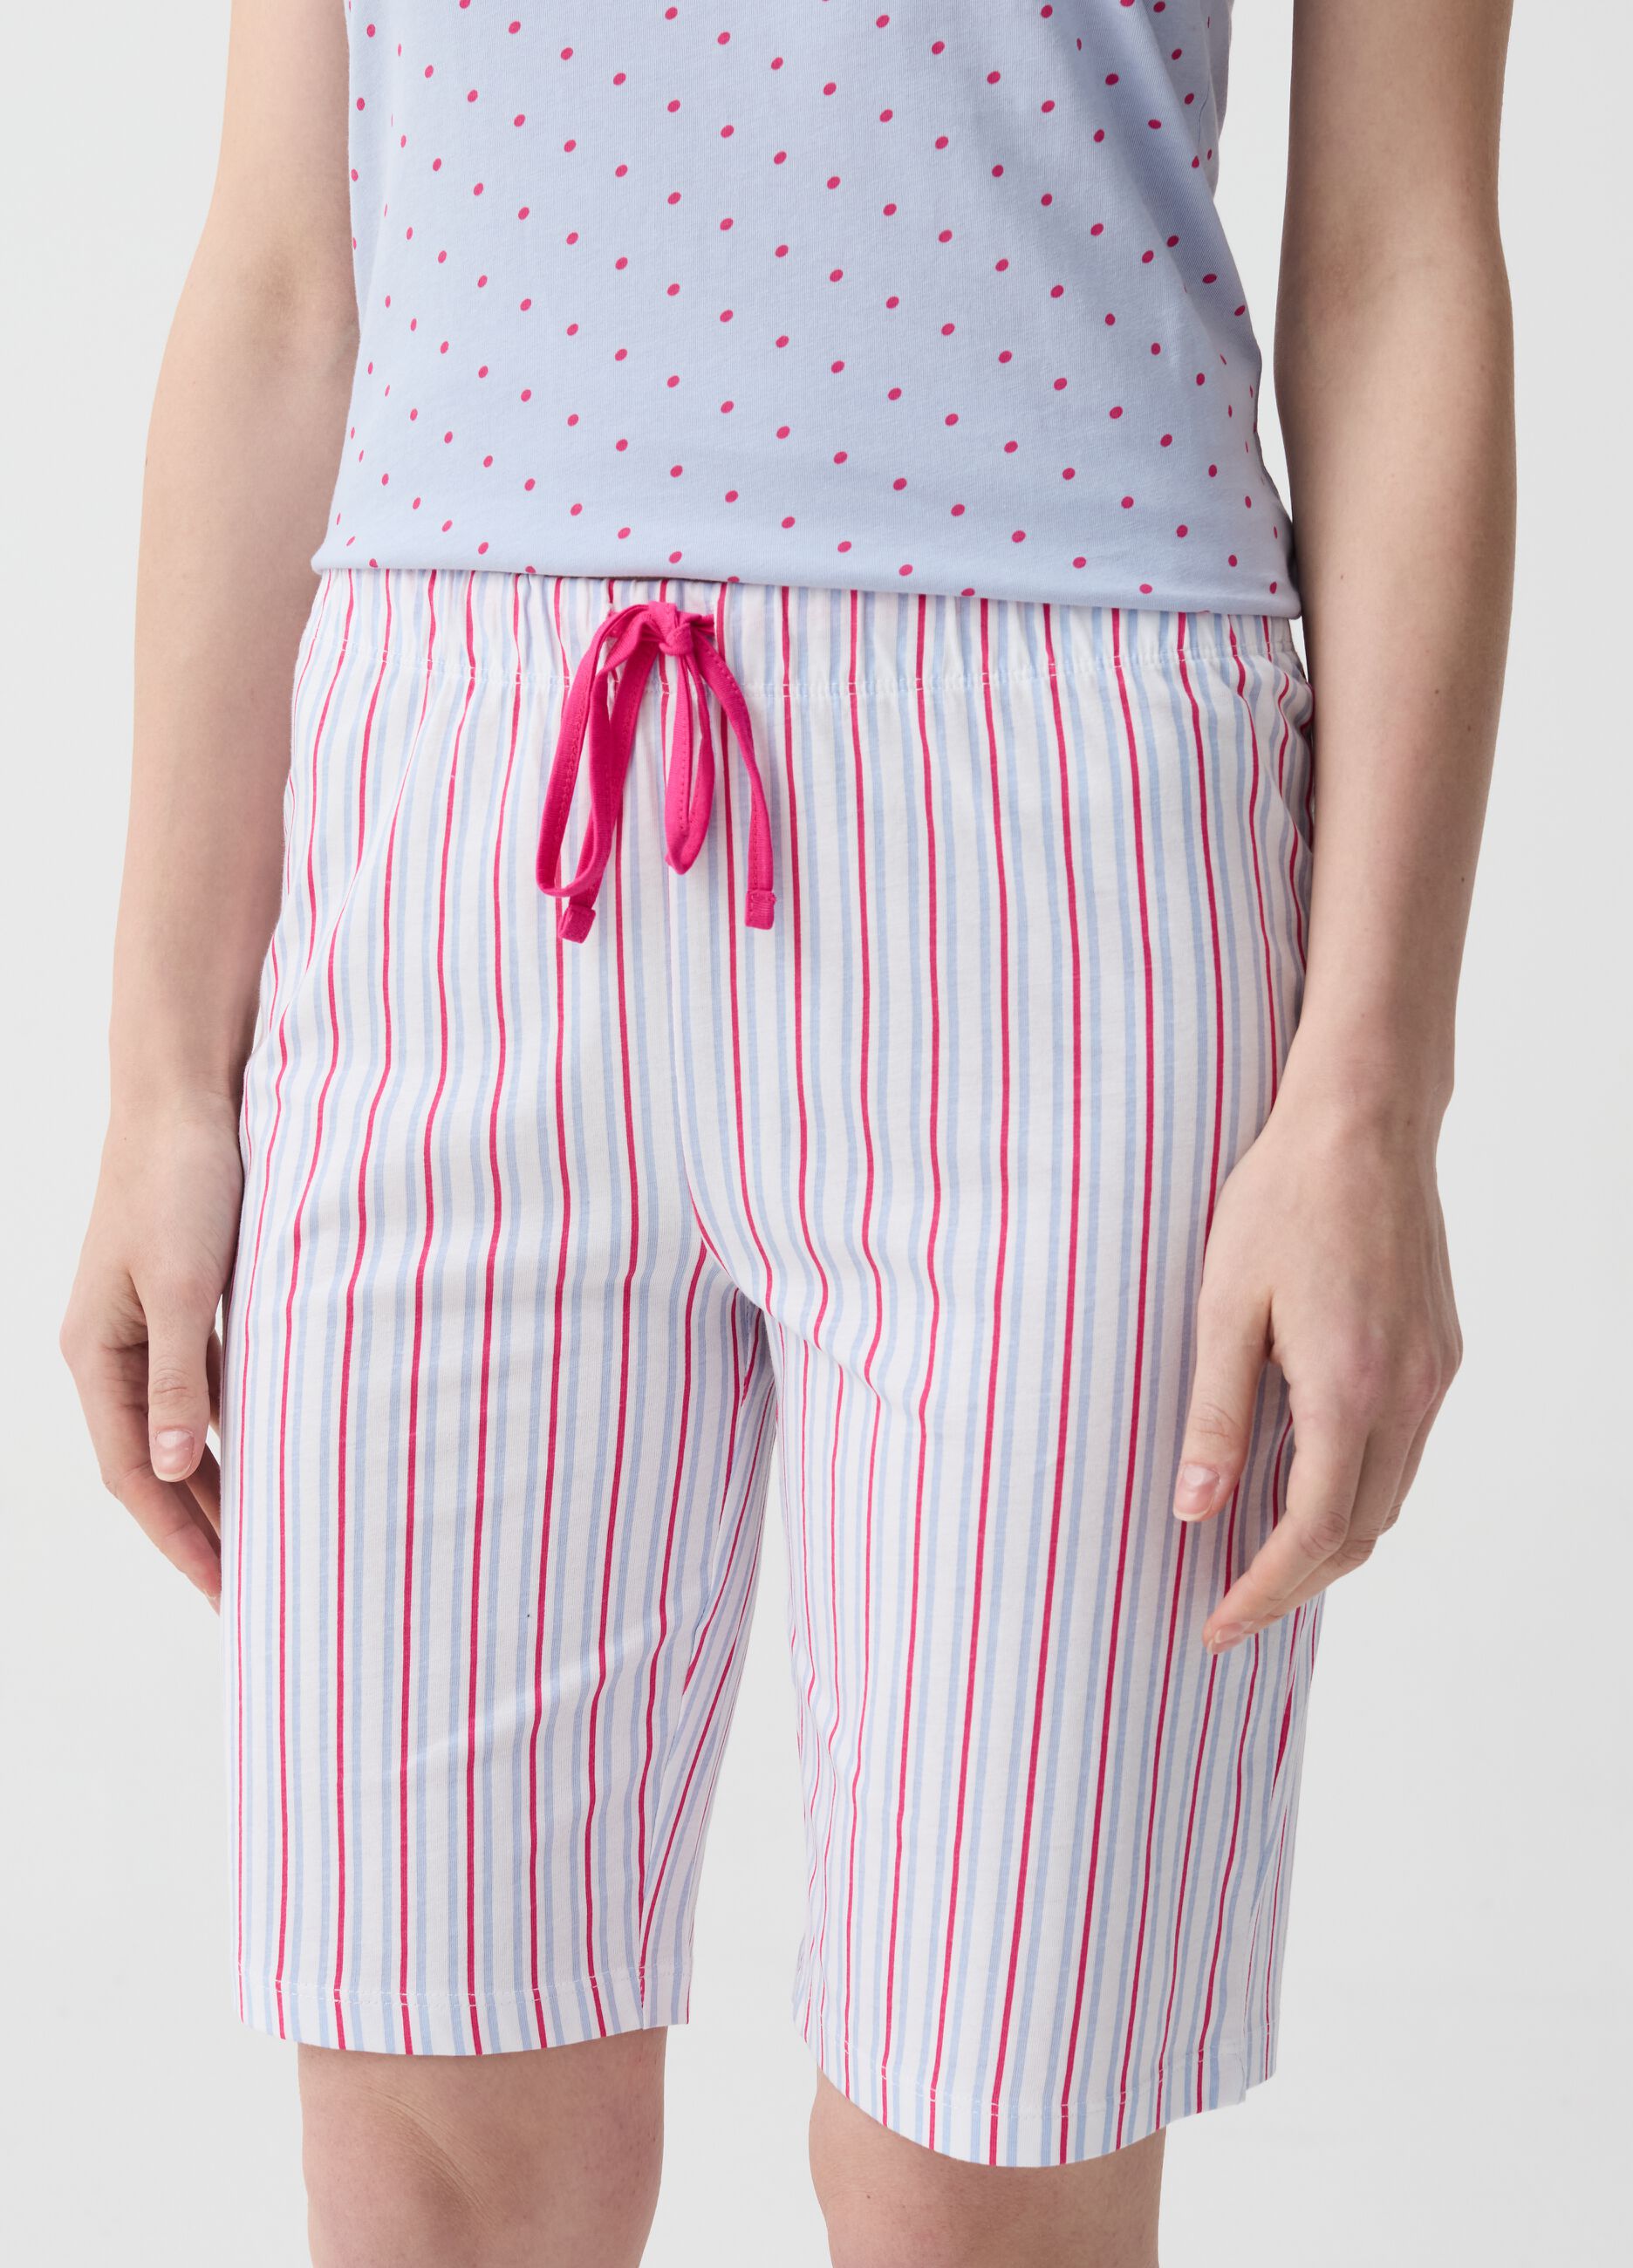 Short pyjama trousers with multicoloured stripes